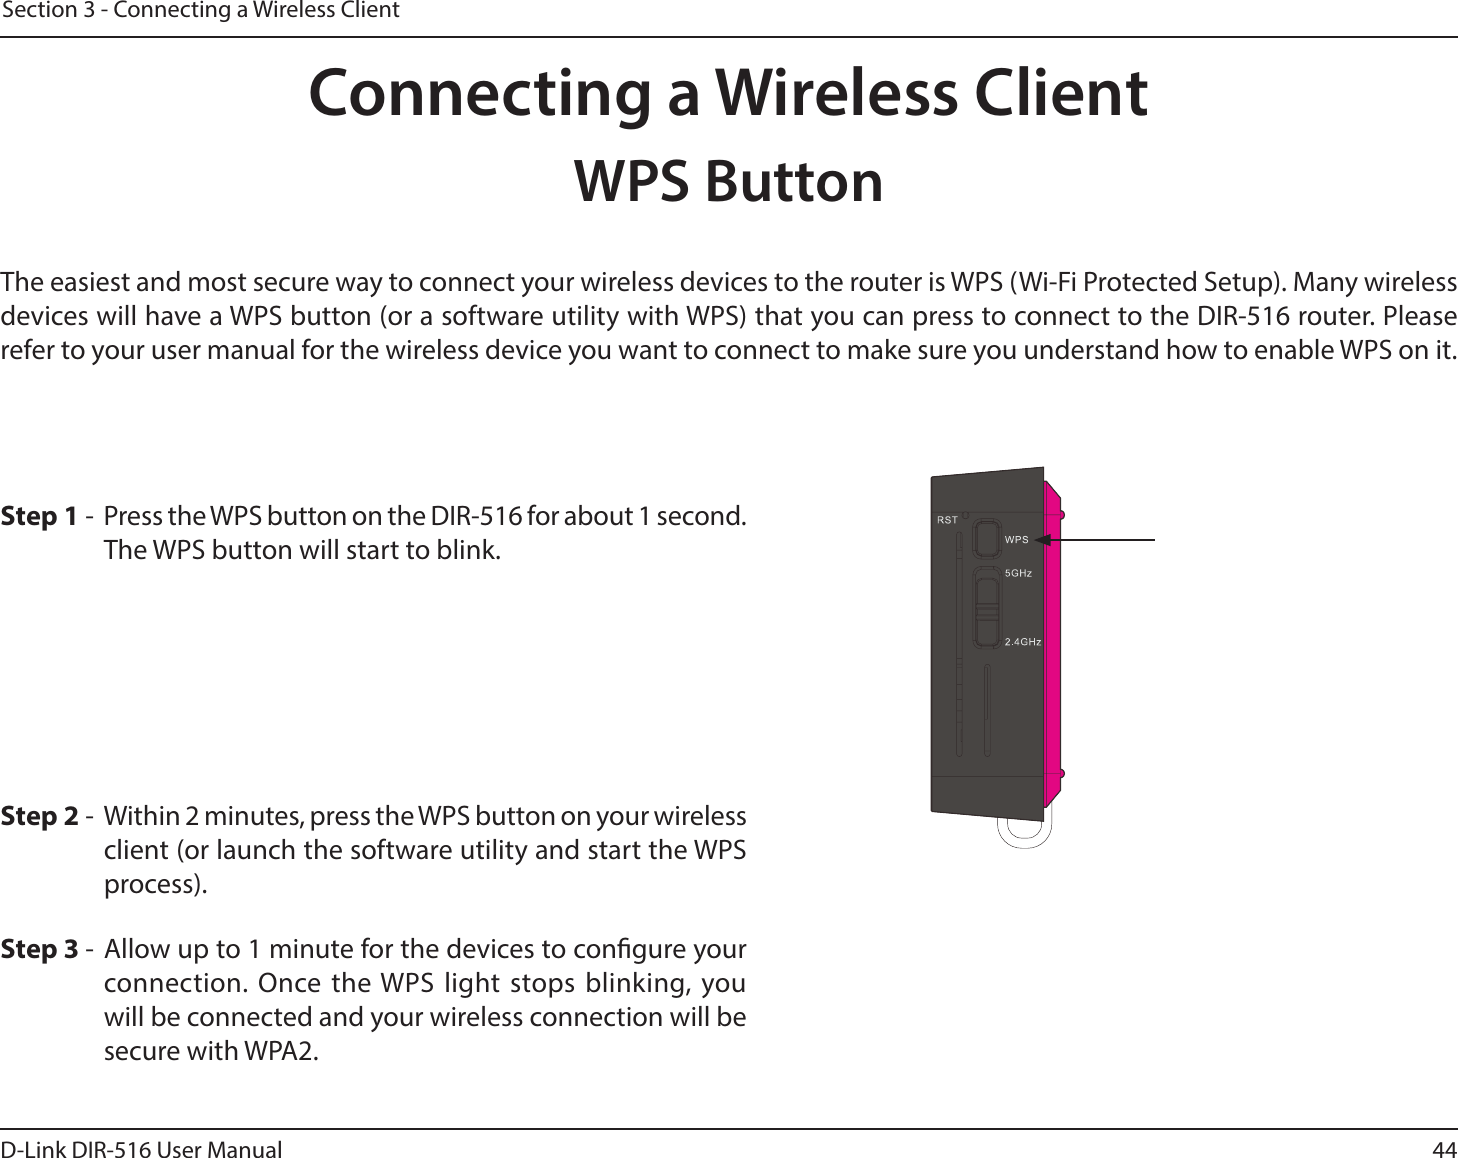 44D-Link DIR-516 User ManualSection 3 - Connecting a Wireless ClientConnecting a Wireless ClientWPS ButtonStep 2 -  Within 2 minutes, press the WPS button on your wireless client (or launch the software utility and start the WPS process).The easiest and most secure way to connect your wireless devices to the router is WPS (Wi-Fi Protected Setup). Many wireless devices will have a WPS button (or a software utility with WPS) that you can press to connect to the DIR-516 router. Please refer to your user manual for the wireless device you want to connect to make sure you understand how to enable WPS on it.Step 1 -  Press the WPS button on the DIR-516 for about 1 second. The WPS button will start to blink.Step 3 - Allow up to 1 minute for the devices to congure your connection. Once the WPS light stops blinking, you will be connected and your wireless connection will be secure with WPA2.